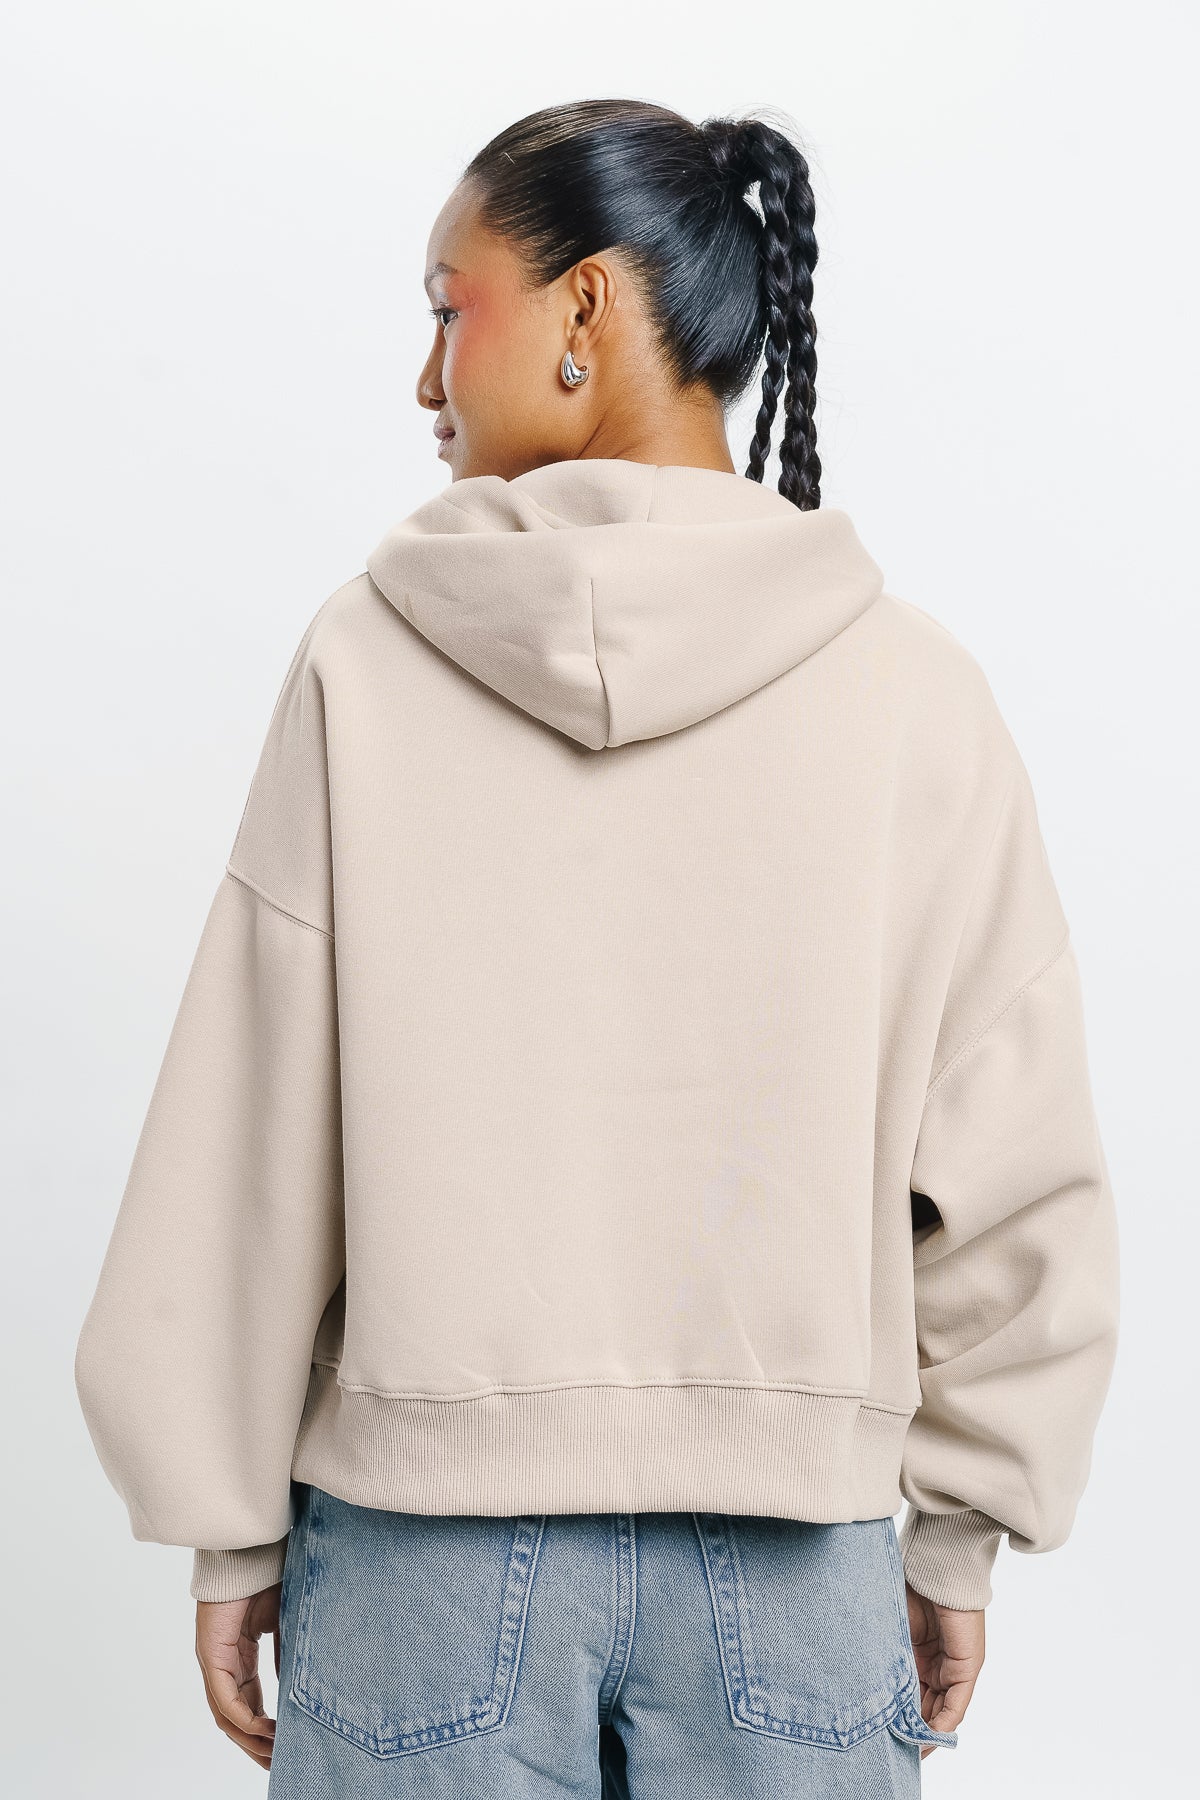 I DON'T CARE BEIGE HOODIE